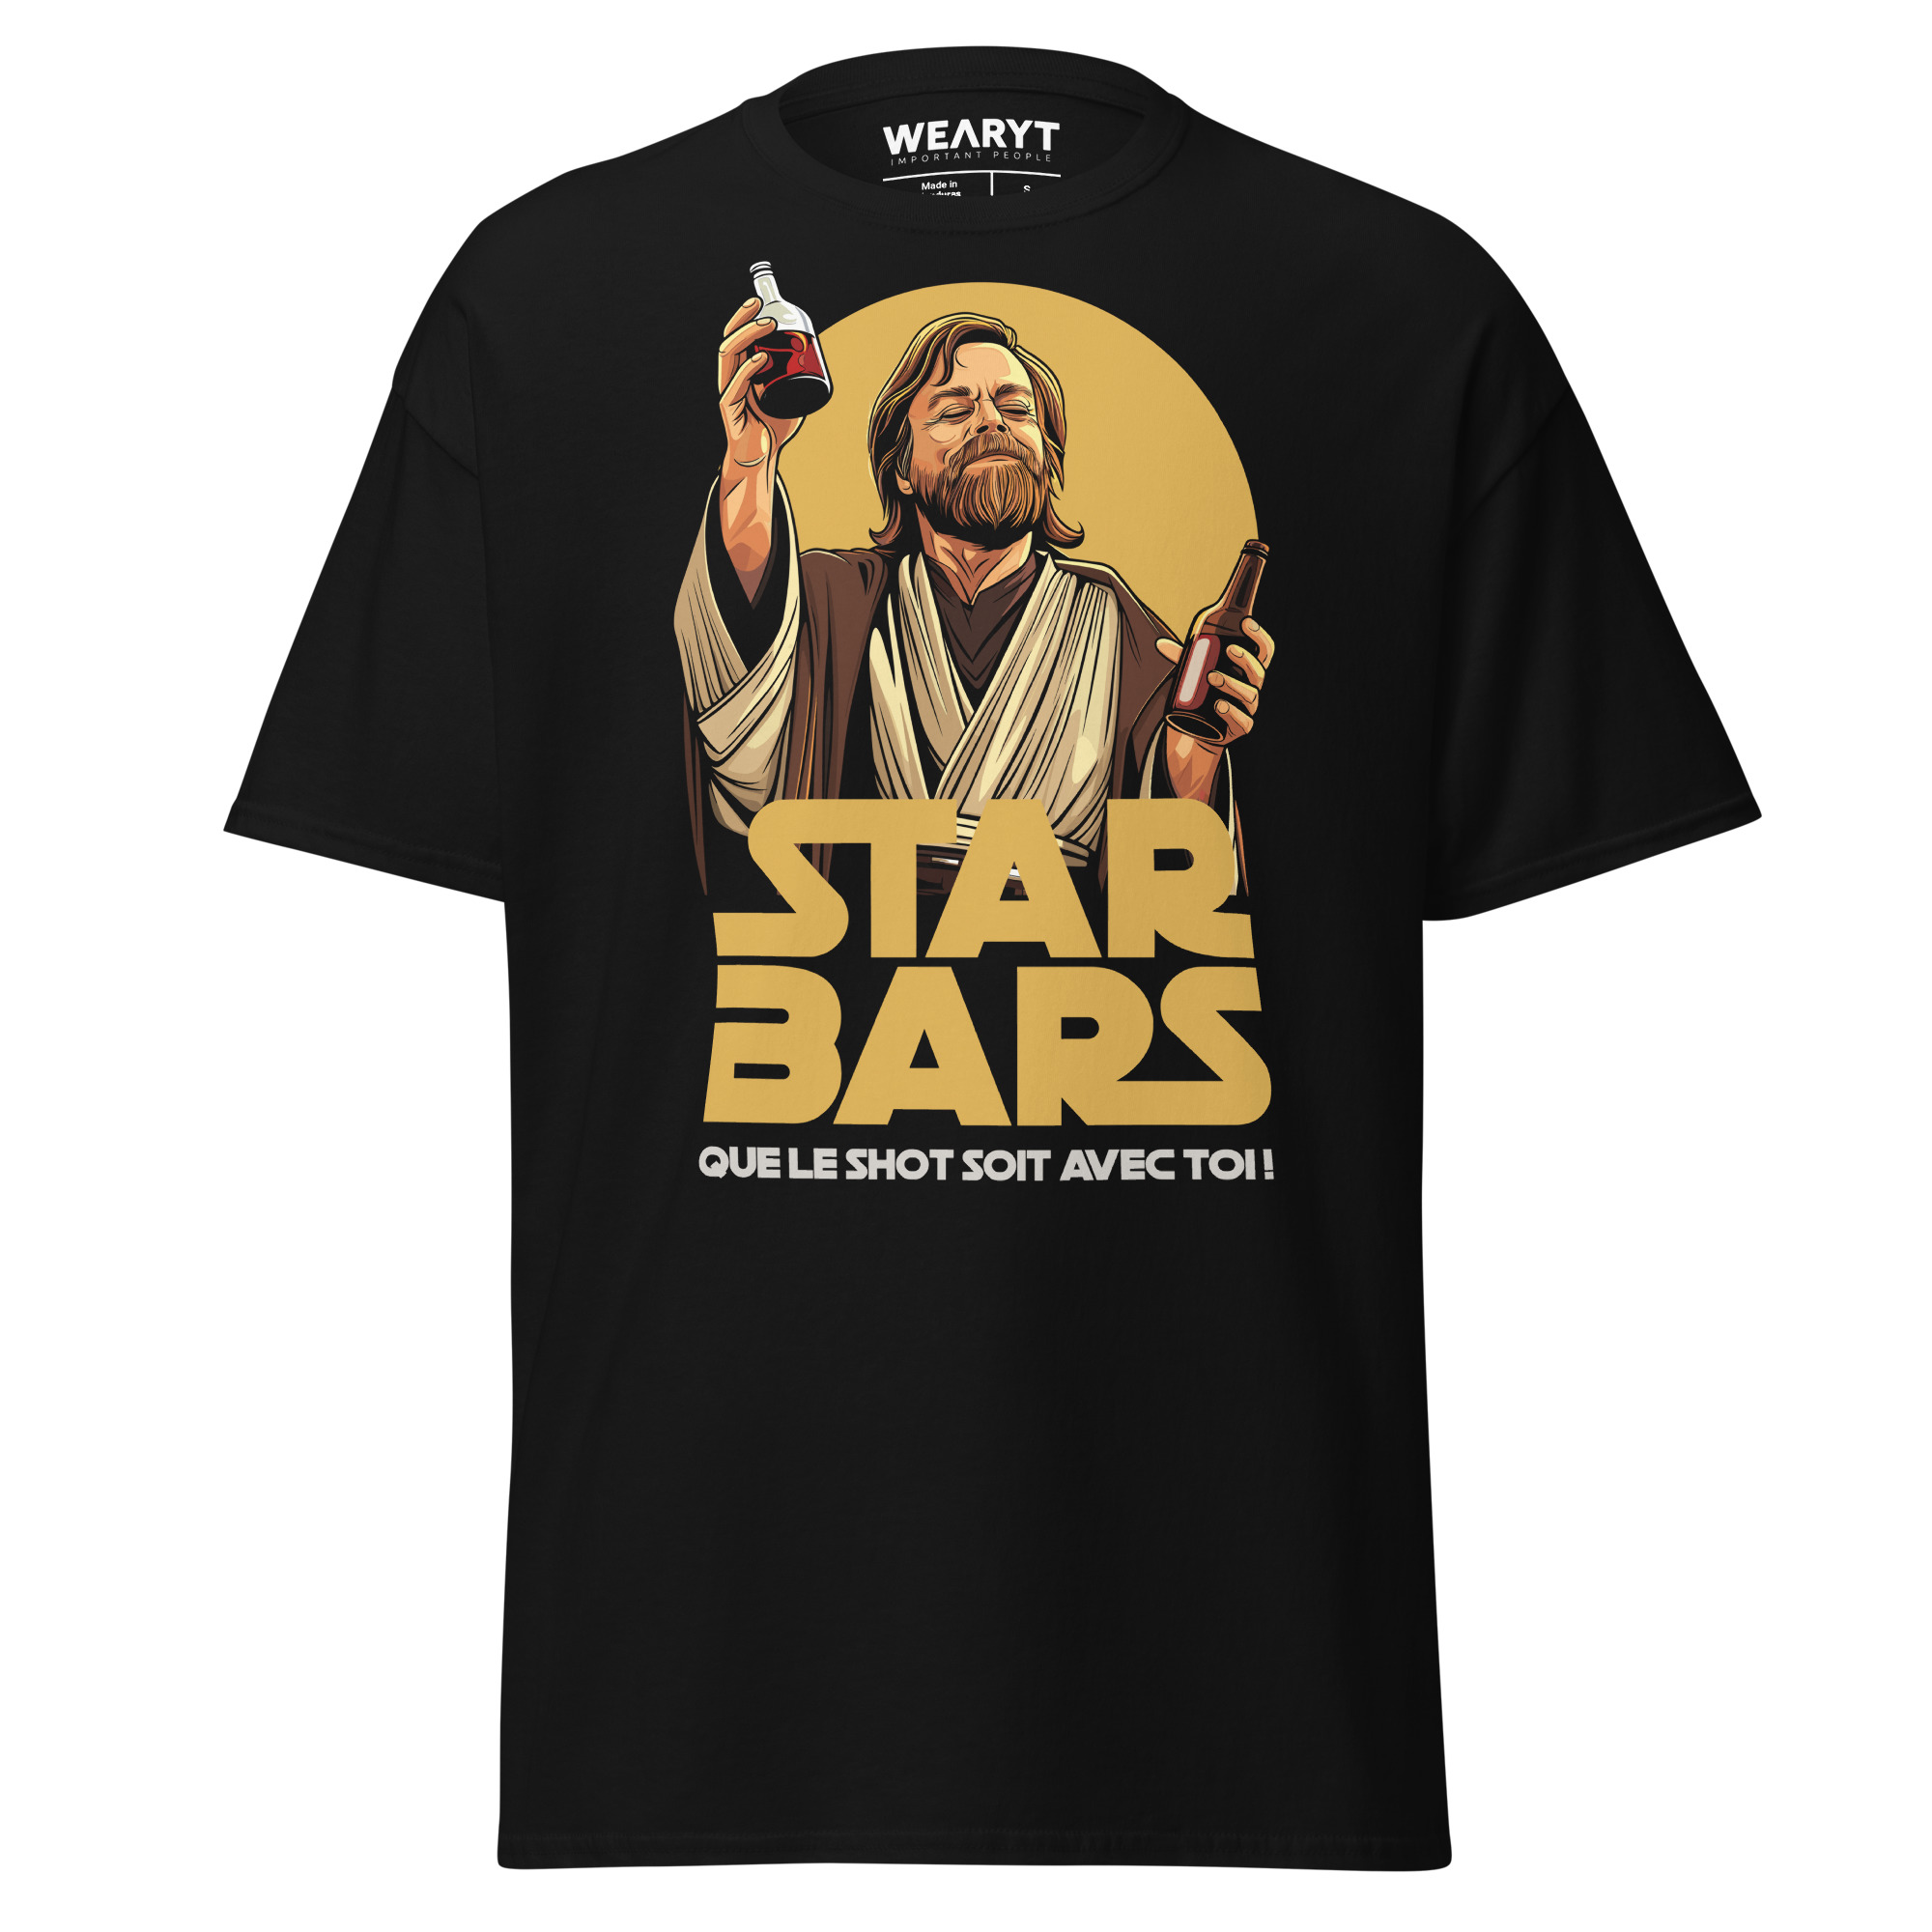 T-shirt – Star Bars – May the shot night be with you! Men's Clothing Wearyt